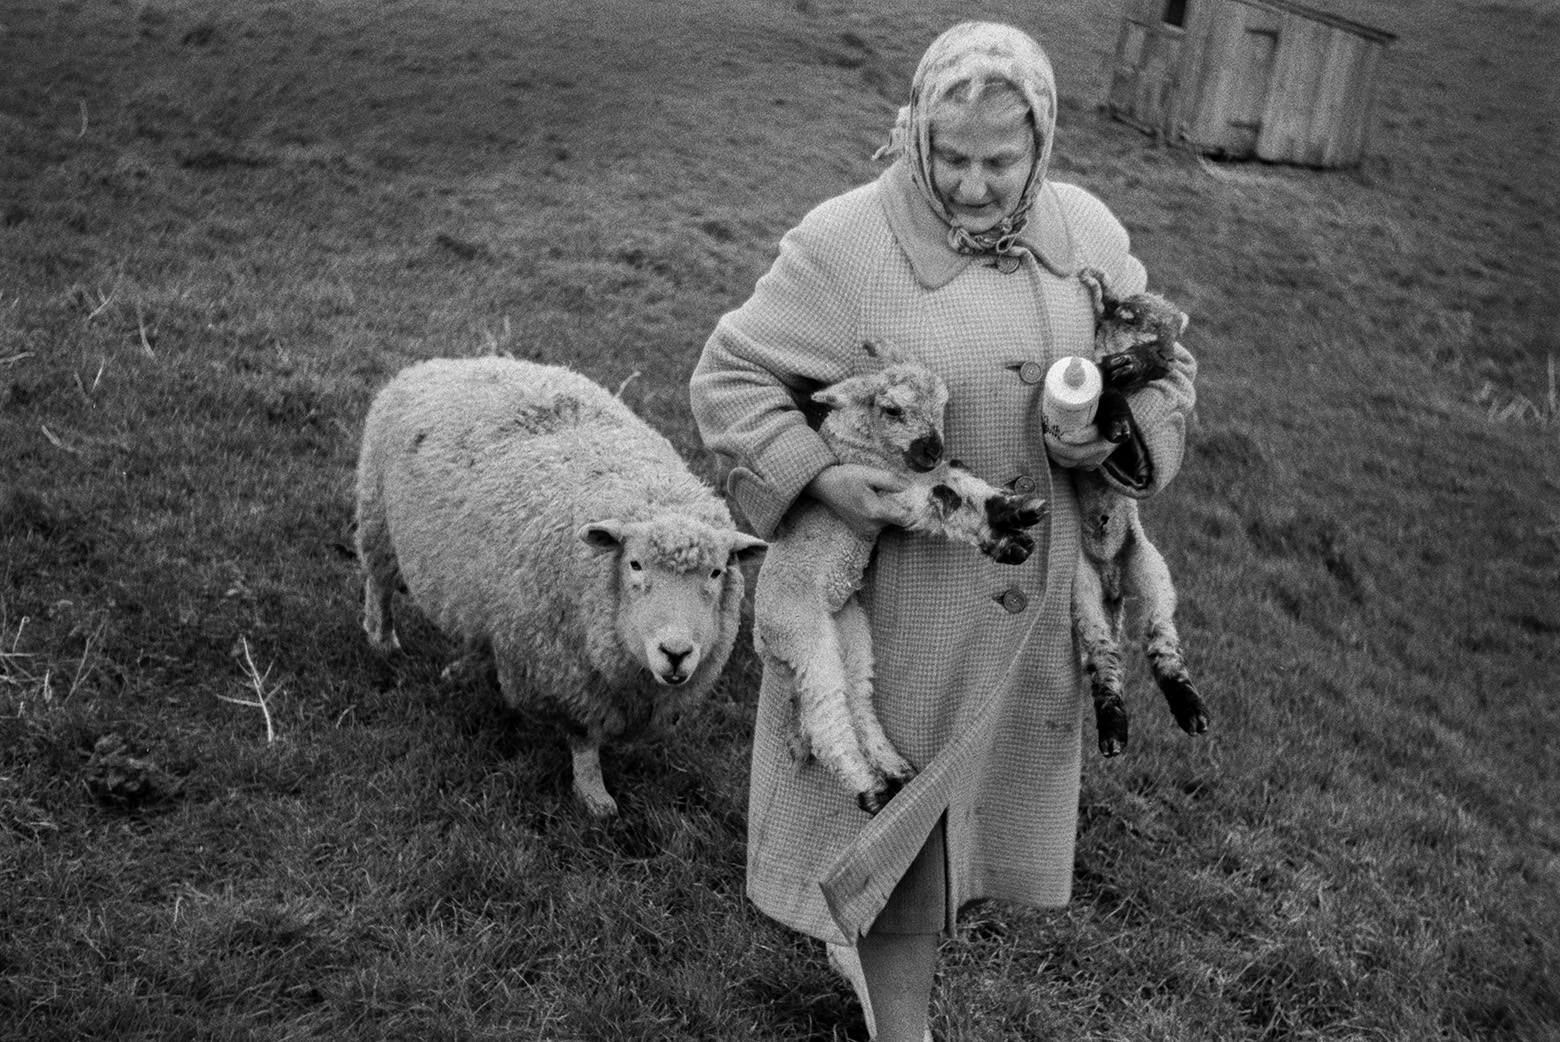 Woman carrying two lambs and a bottle  through a field at Mill Road Farm, Beaford. The ewe is following her. The farm was also known as Jeffrys.